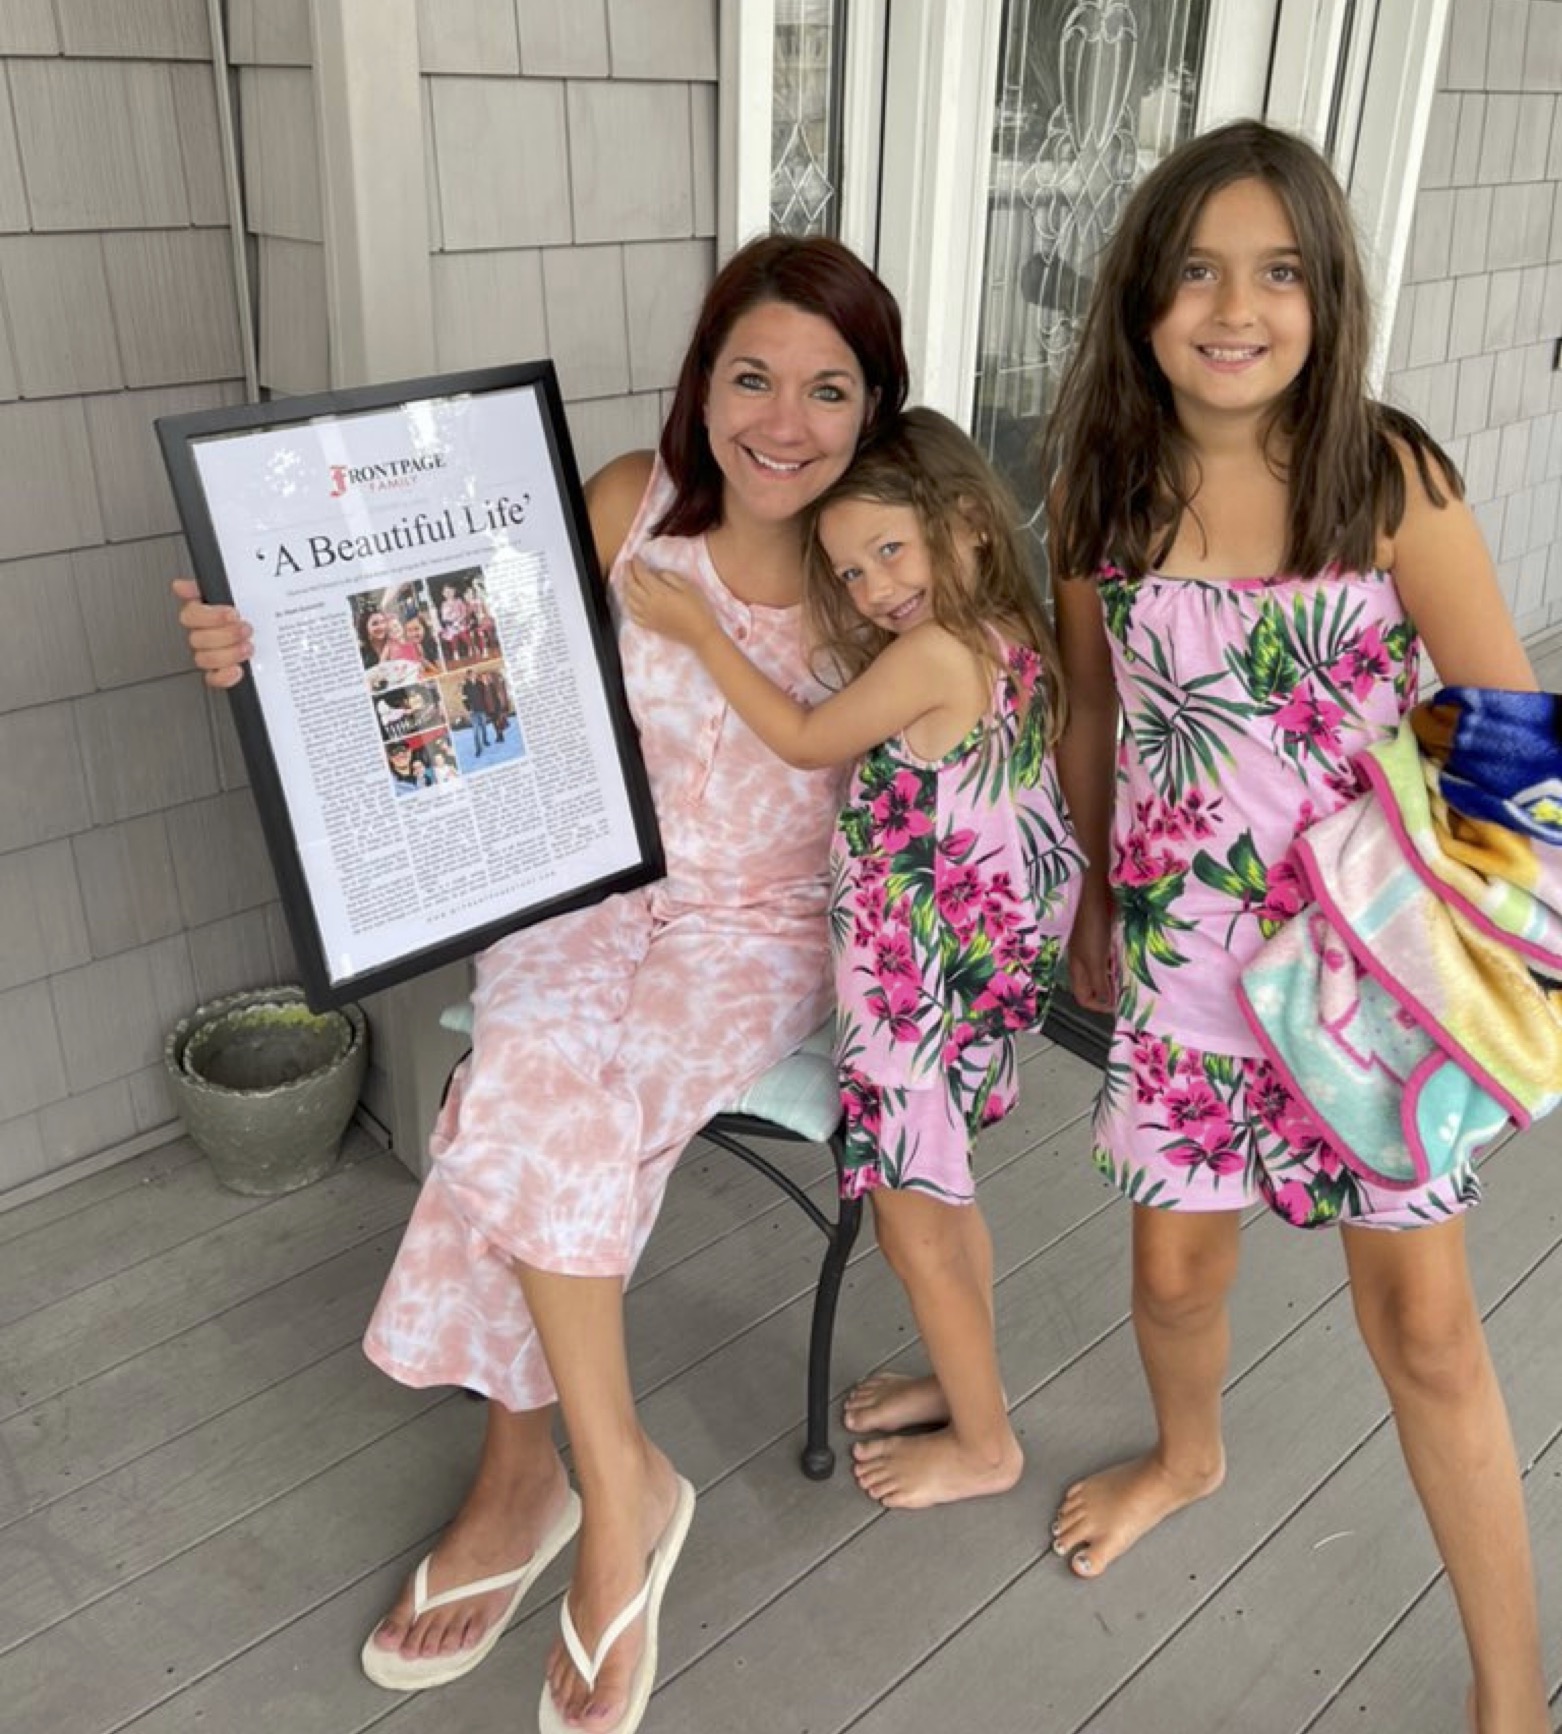 Mom smiling with personalized newspaper story and daughters (plus)